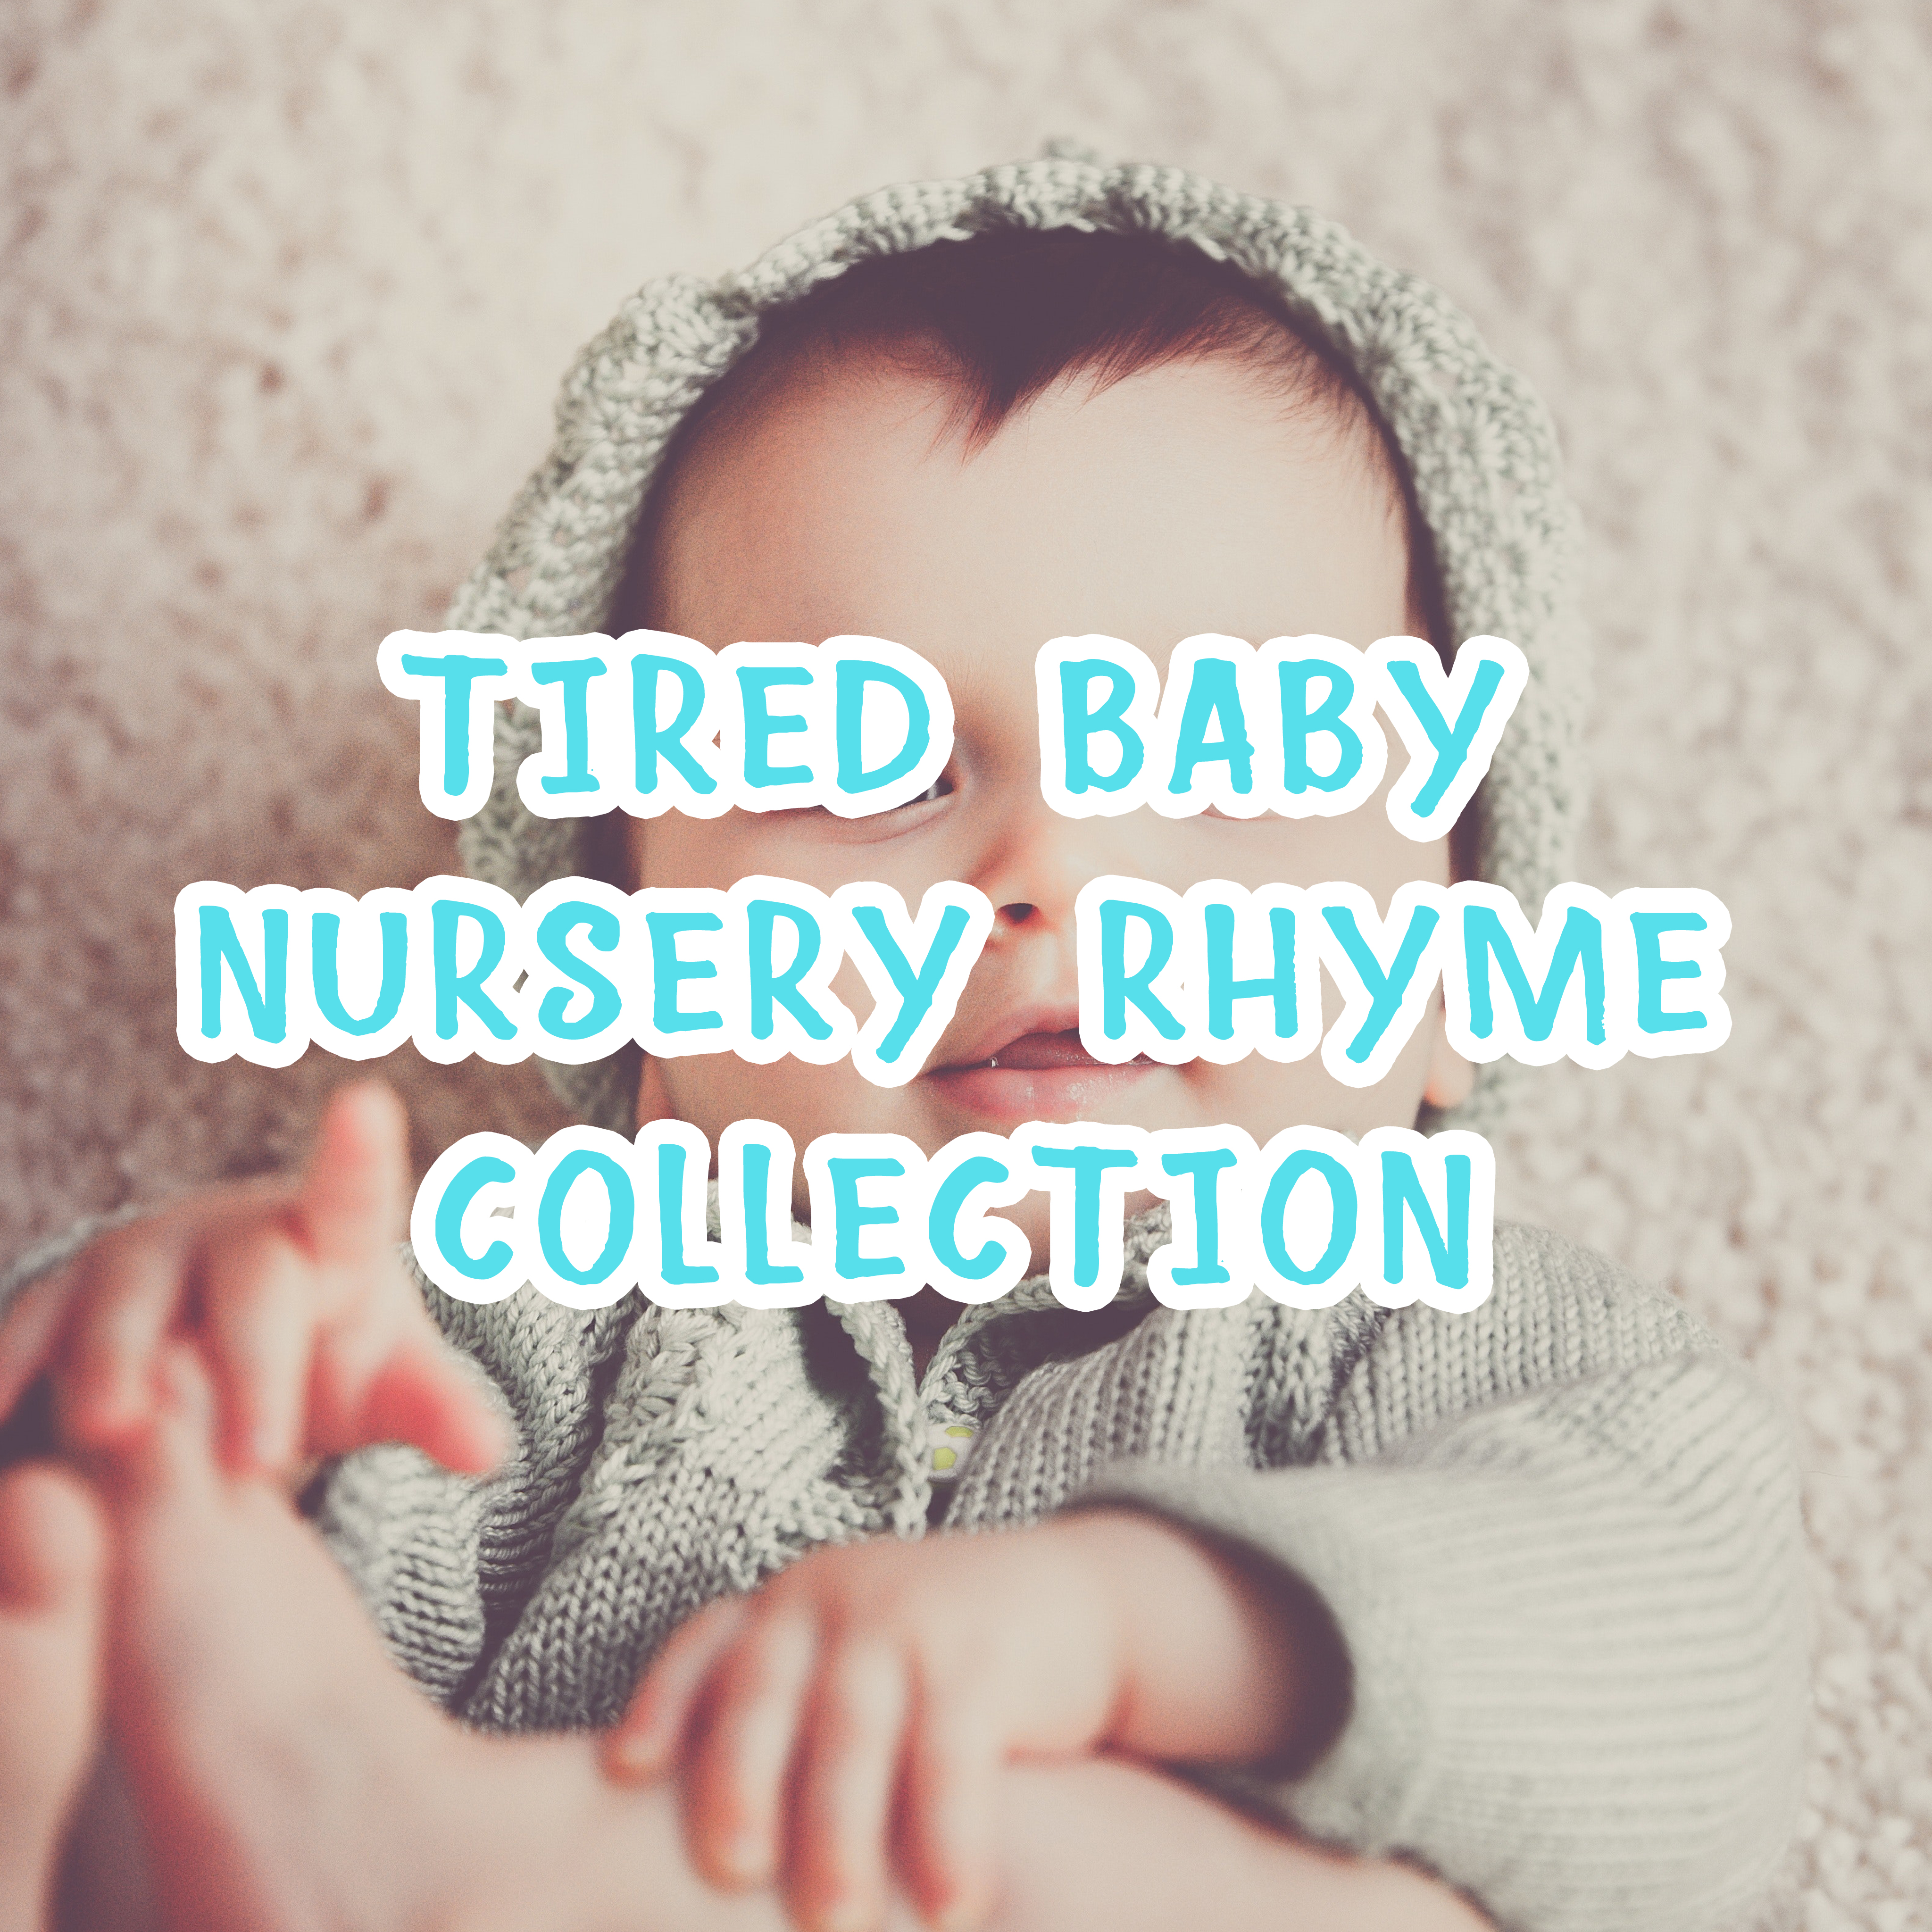 2018 A Tired Baby Nursery Rhyme Collection